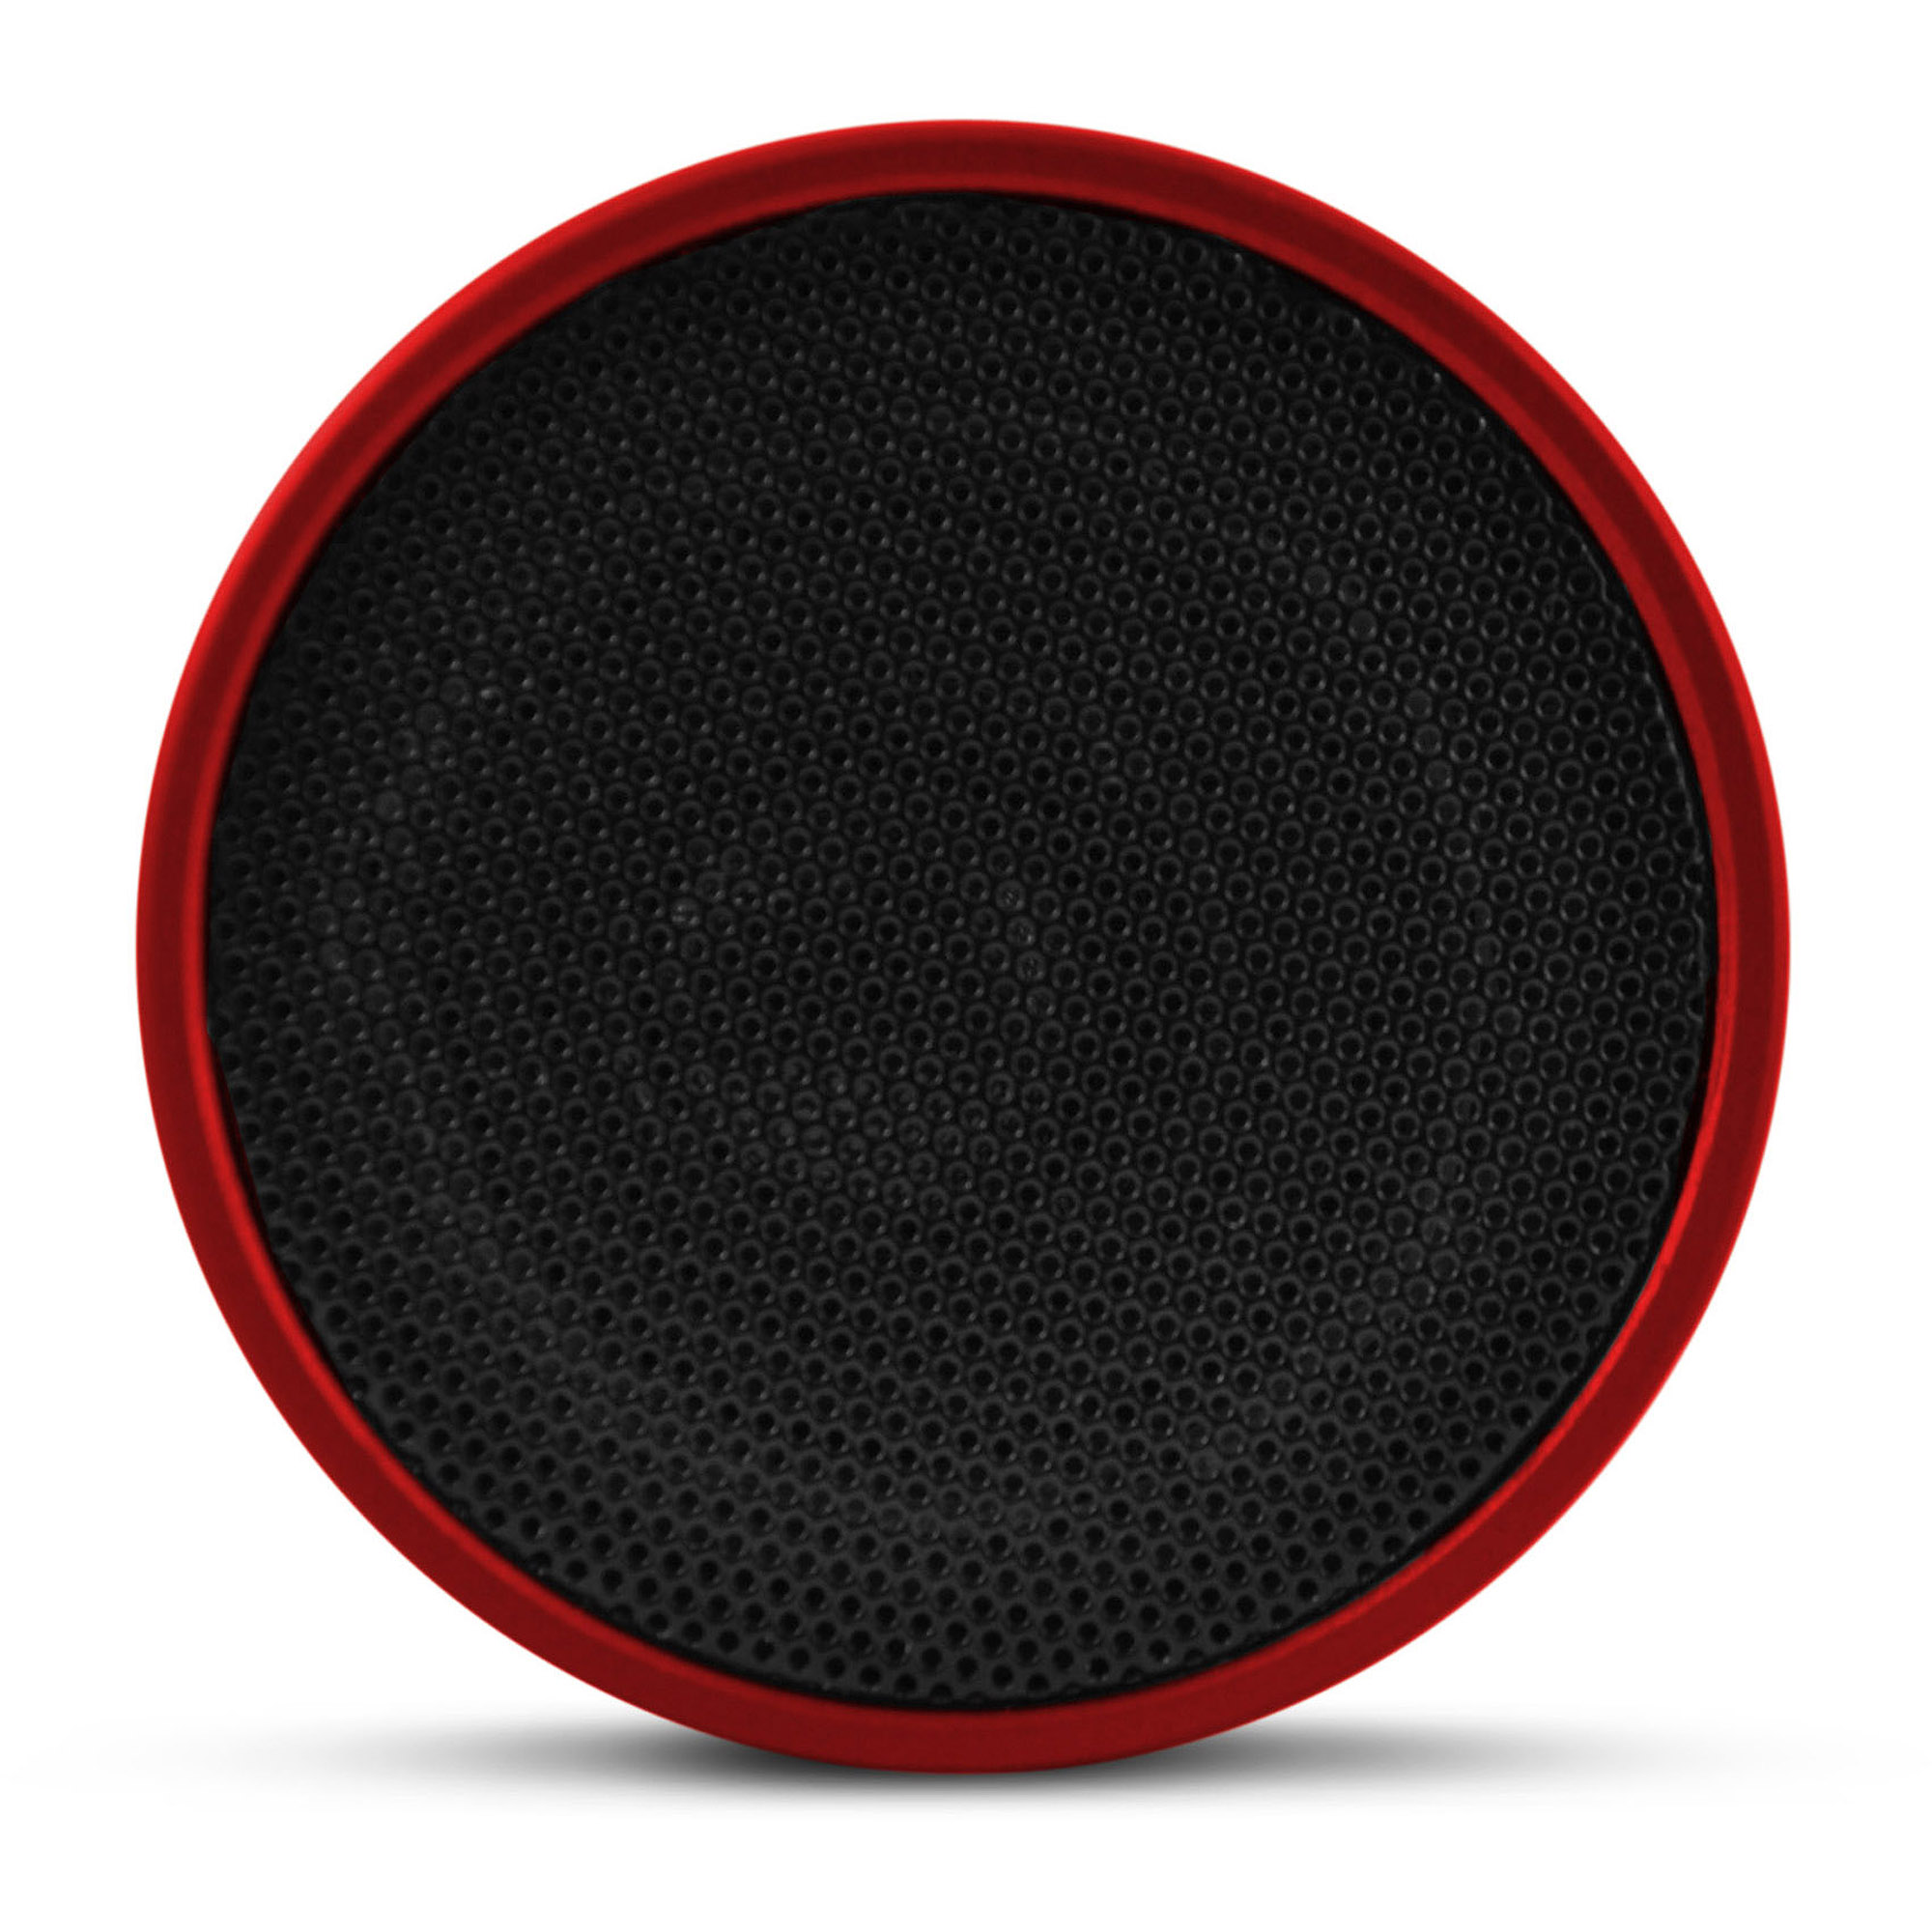 Ematic ESB107RD Bluetooth Wireless Speaker and Speakerphone, Red - image 3 of 10